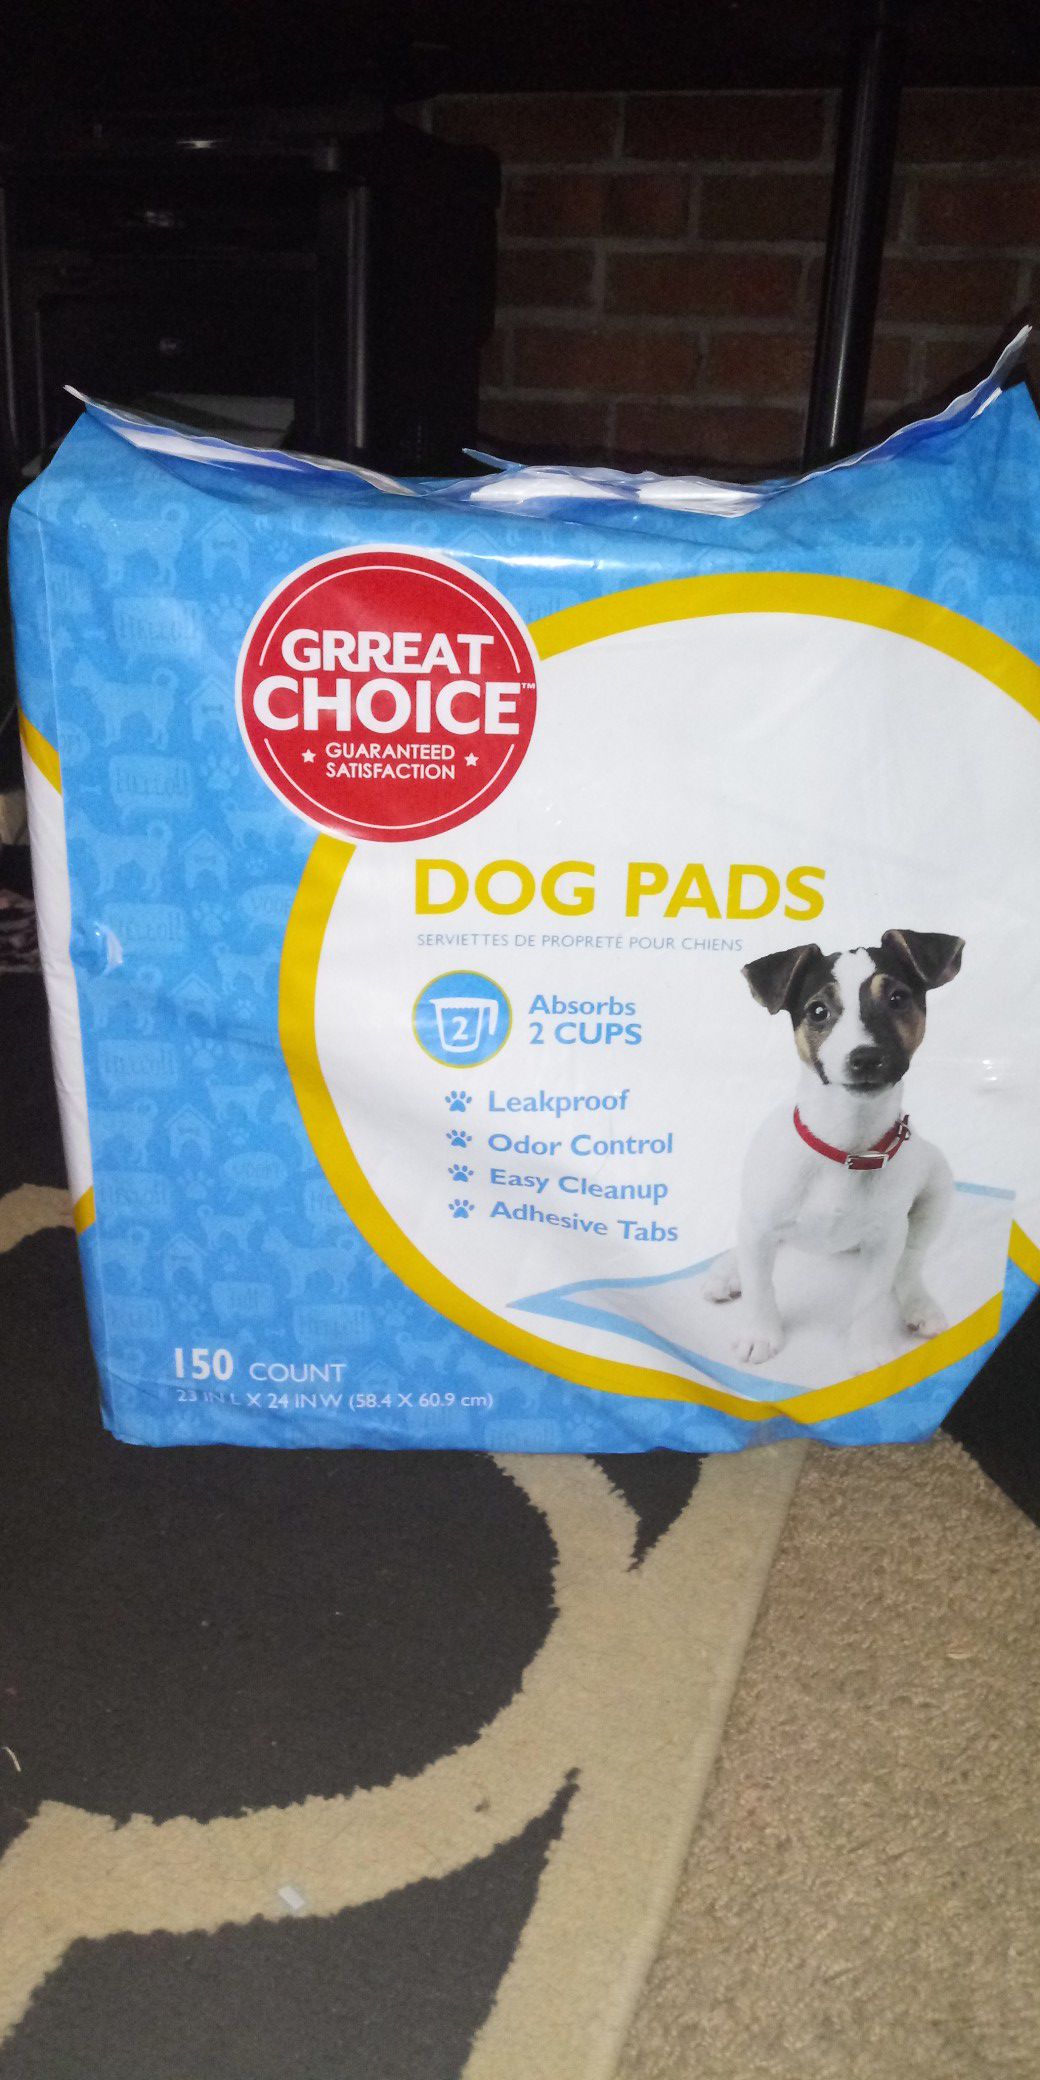 Dog pads new 150 count, i paid $52 dollars